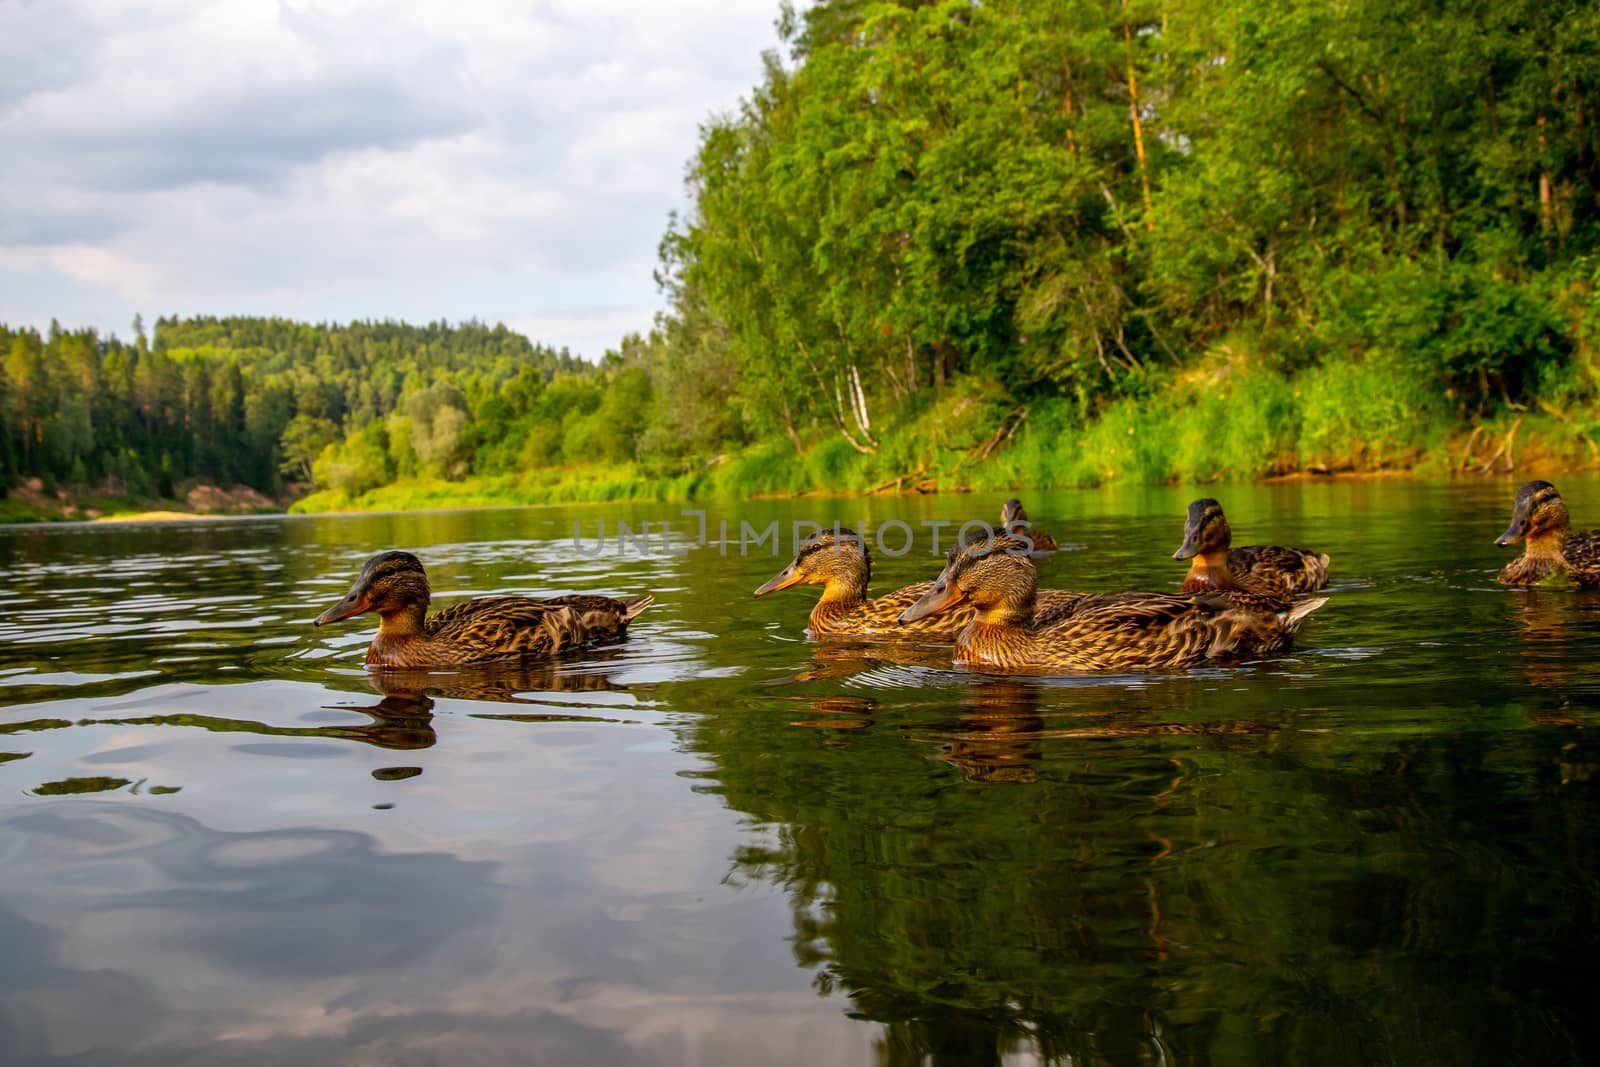 Family of ducks swimming in the river Gauja in sunny summer day, Latvia. Duck is a waterbird with a broad blunt bill, short legs, webbed feet, and a waddling gait.